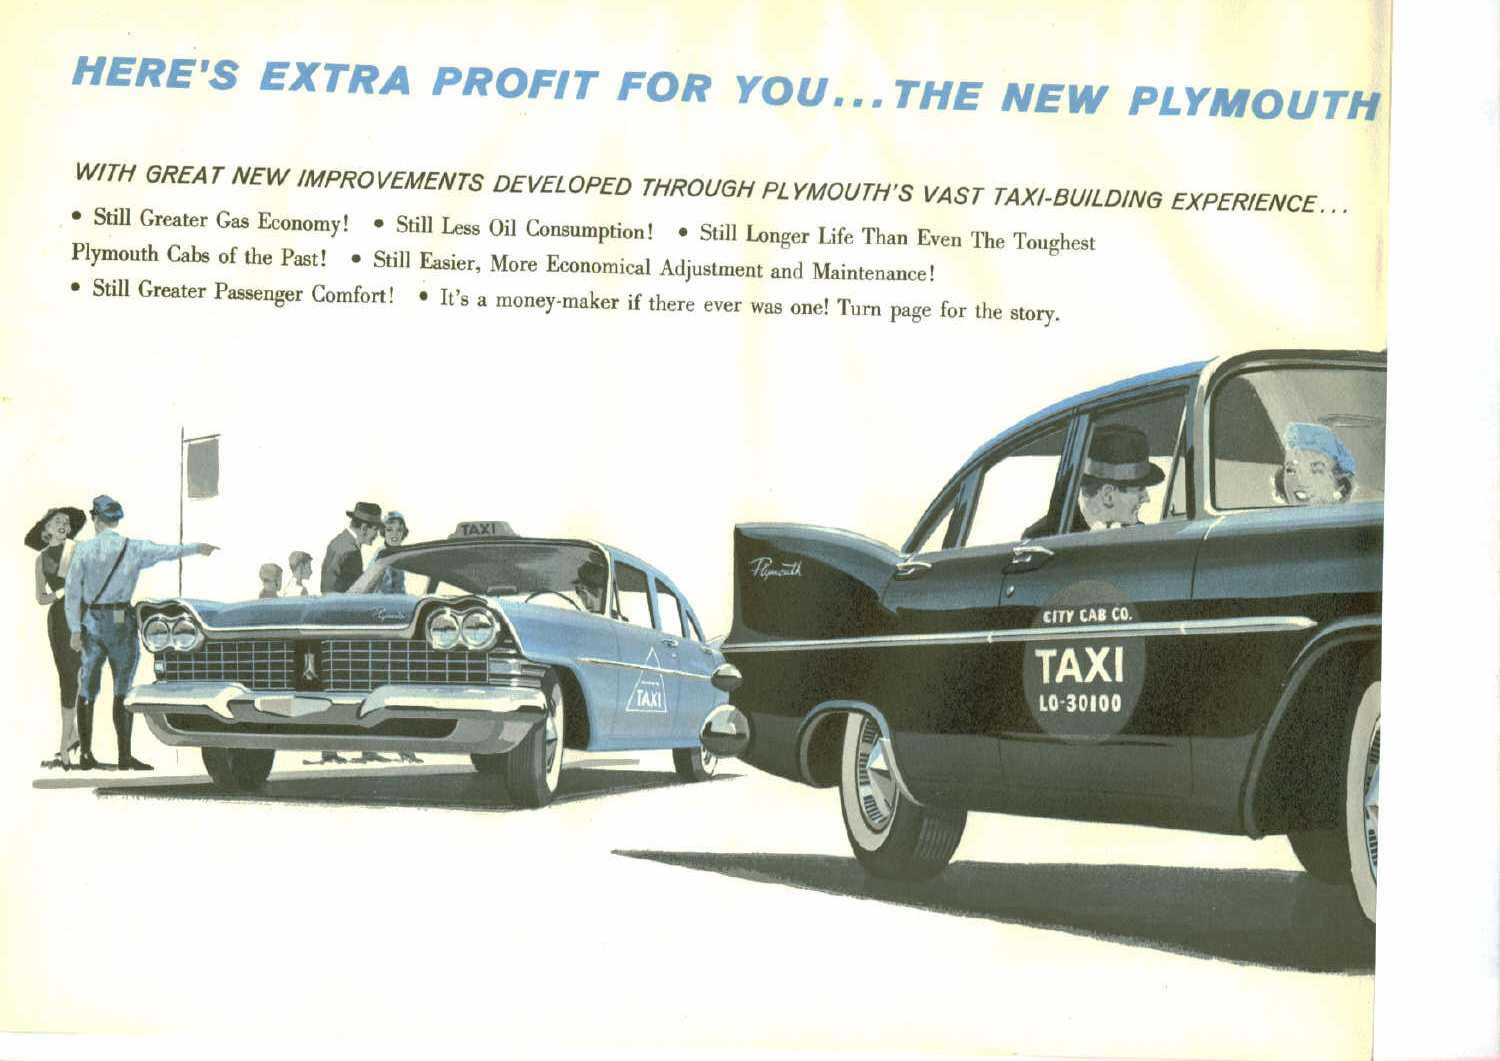 1959_Plymouth_Taxi-01